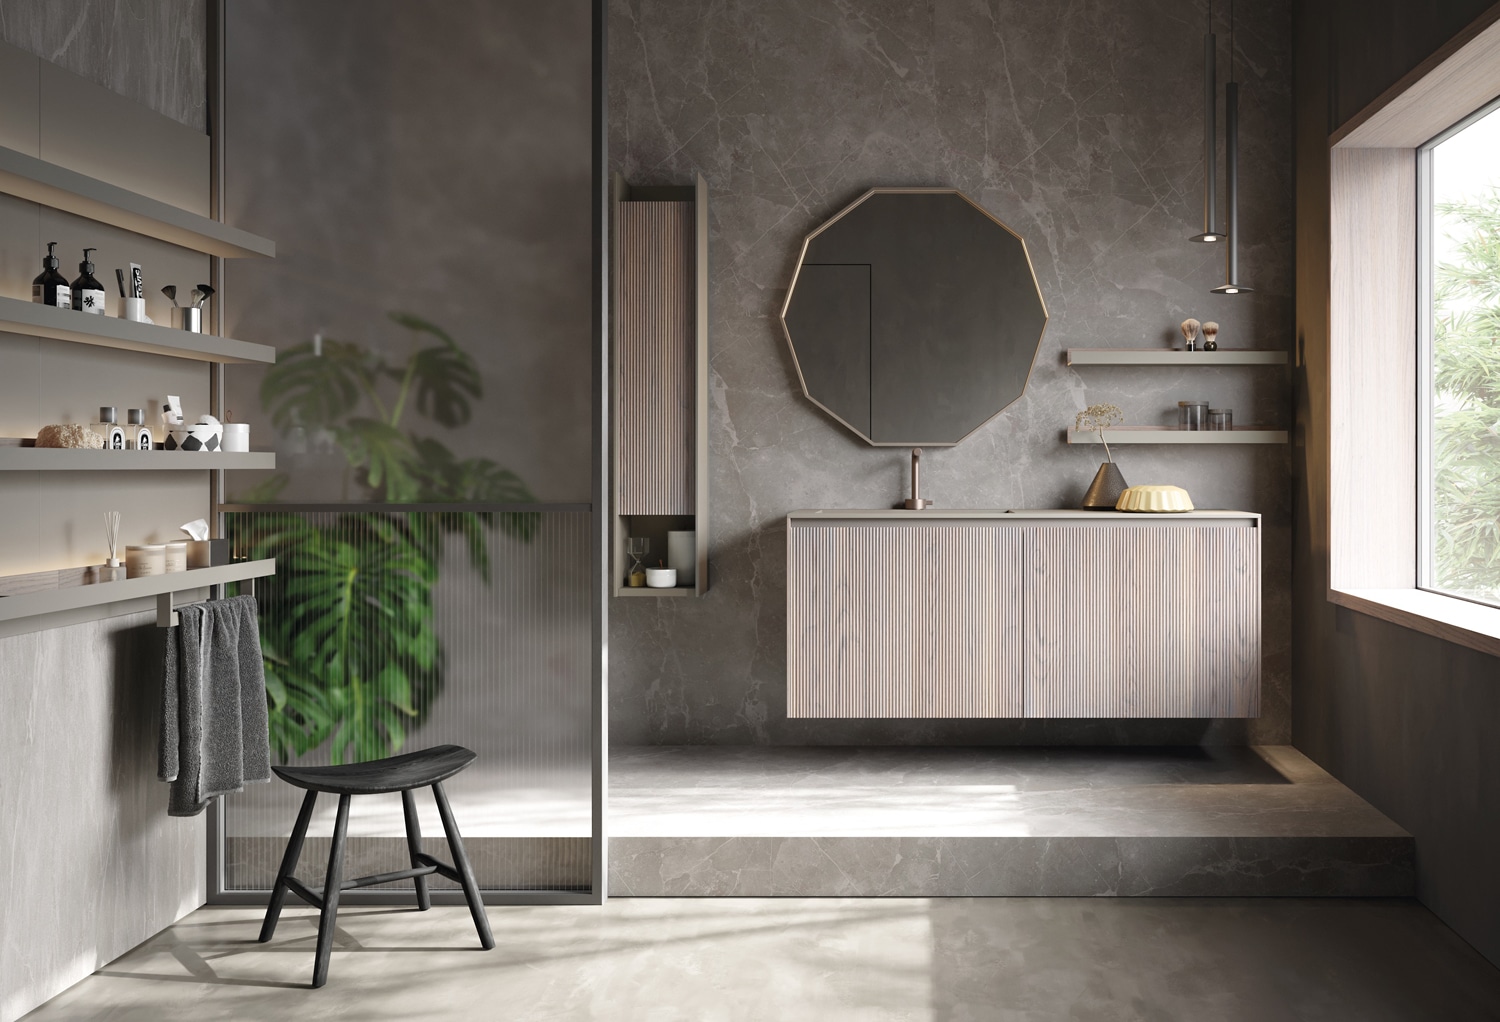 Vanity with plissé doors in Rovere Creta. The door of the tall column is in the same finish, with a structure in Piombo matte lacquer. The ten-sided mirror adds visual variety and its frame in Piombo matte lacquer brings this luxury bath design full circle.  